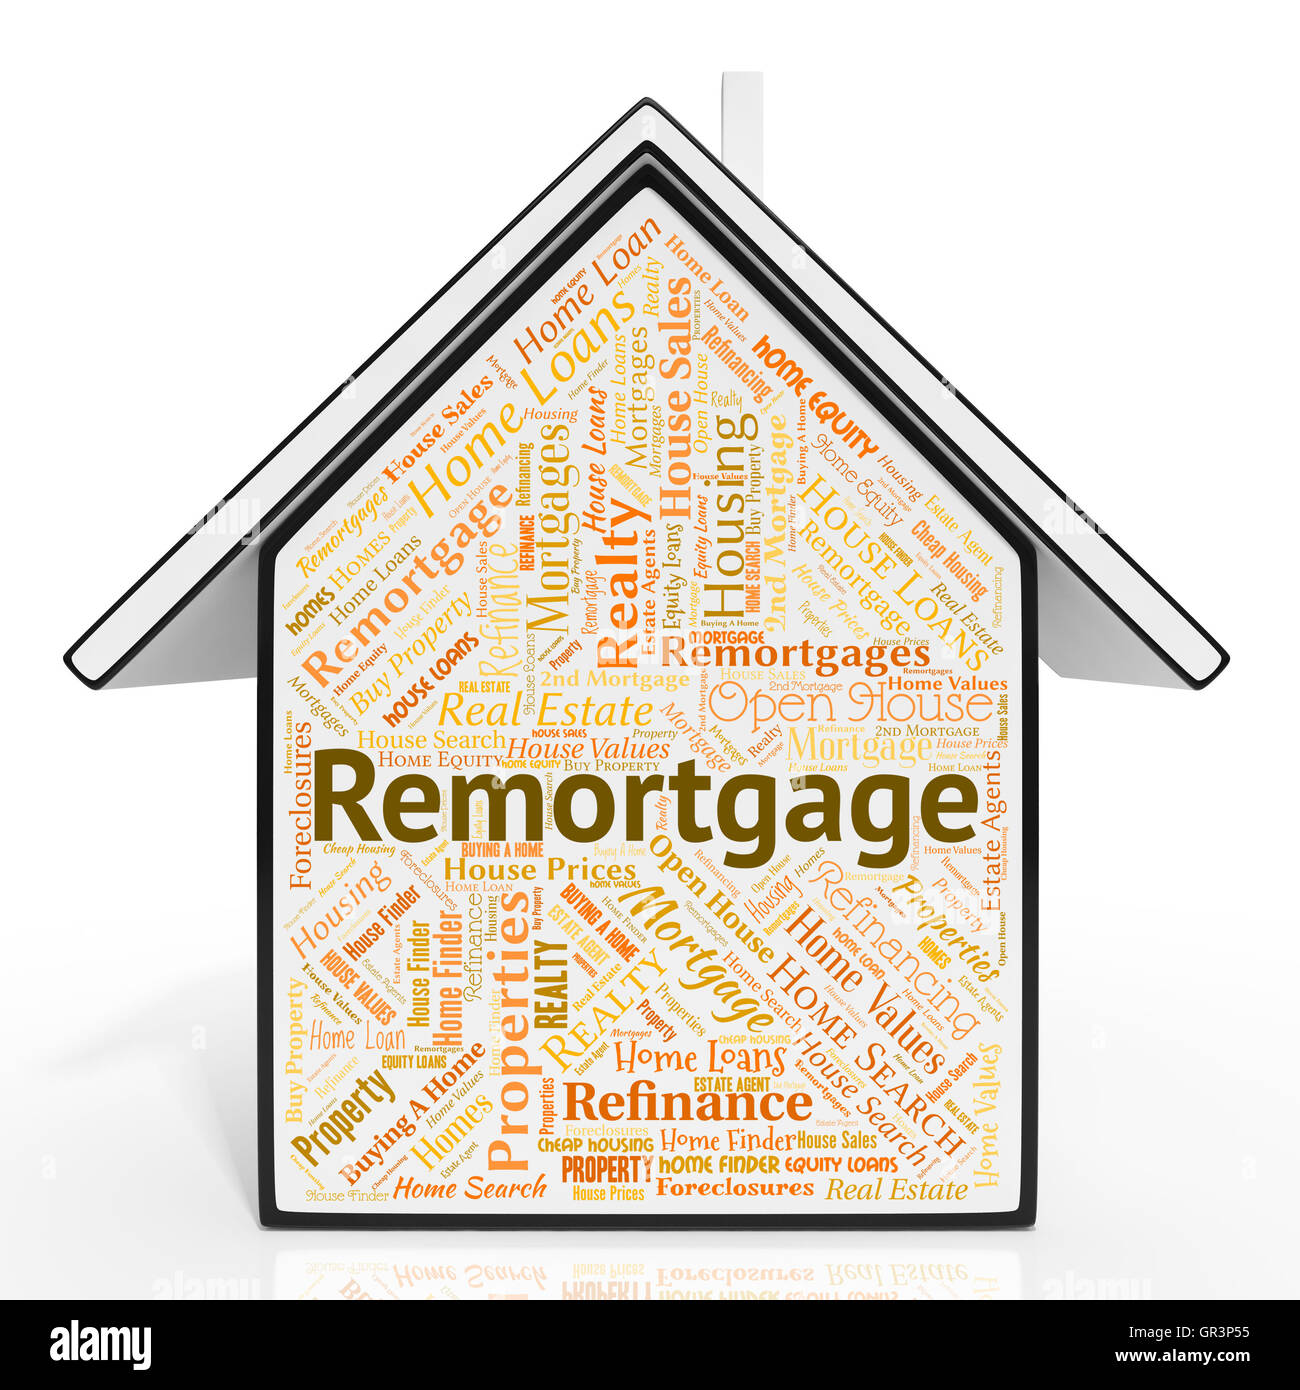 Remortgage House Indicating Real Estate And Finance Stock Photo